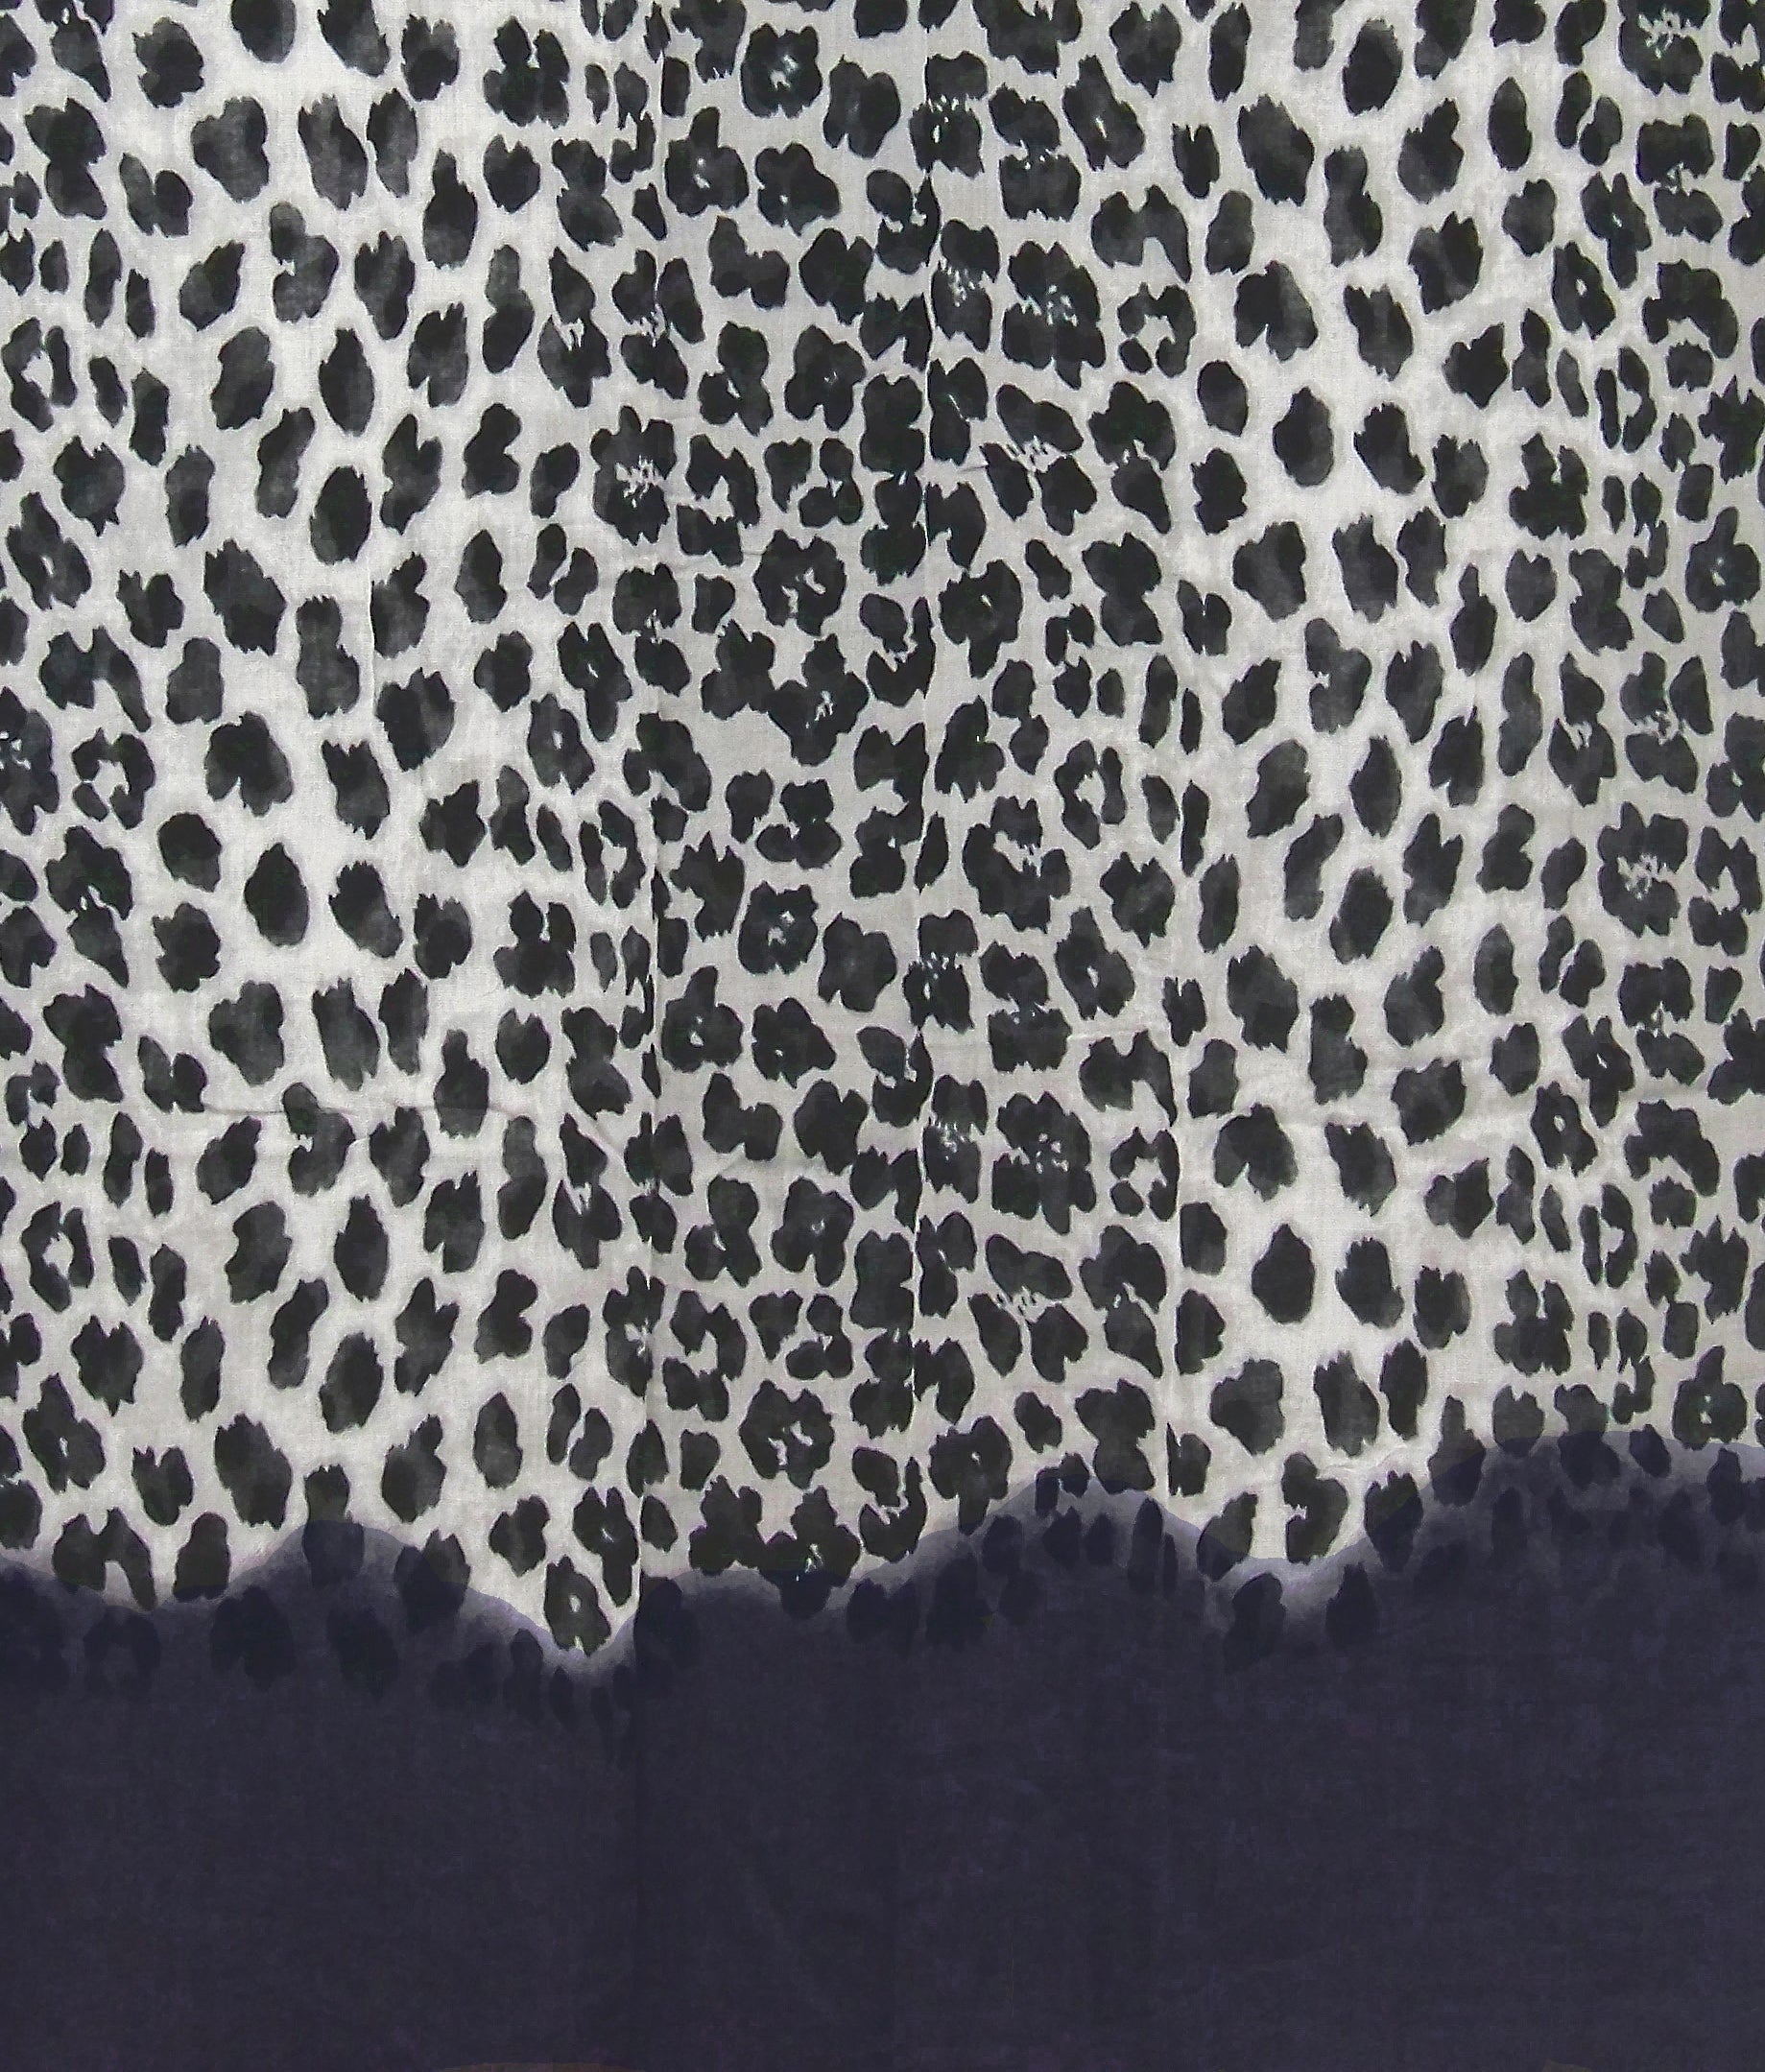 Blue Pacific Animal Print Cashmere Silk Scarf in Grey and Snow 78 x 22